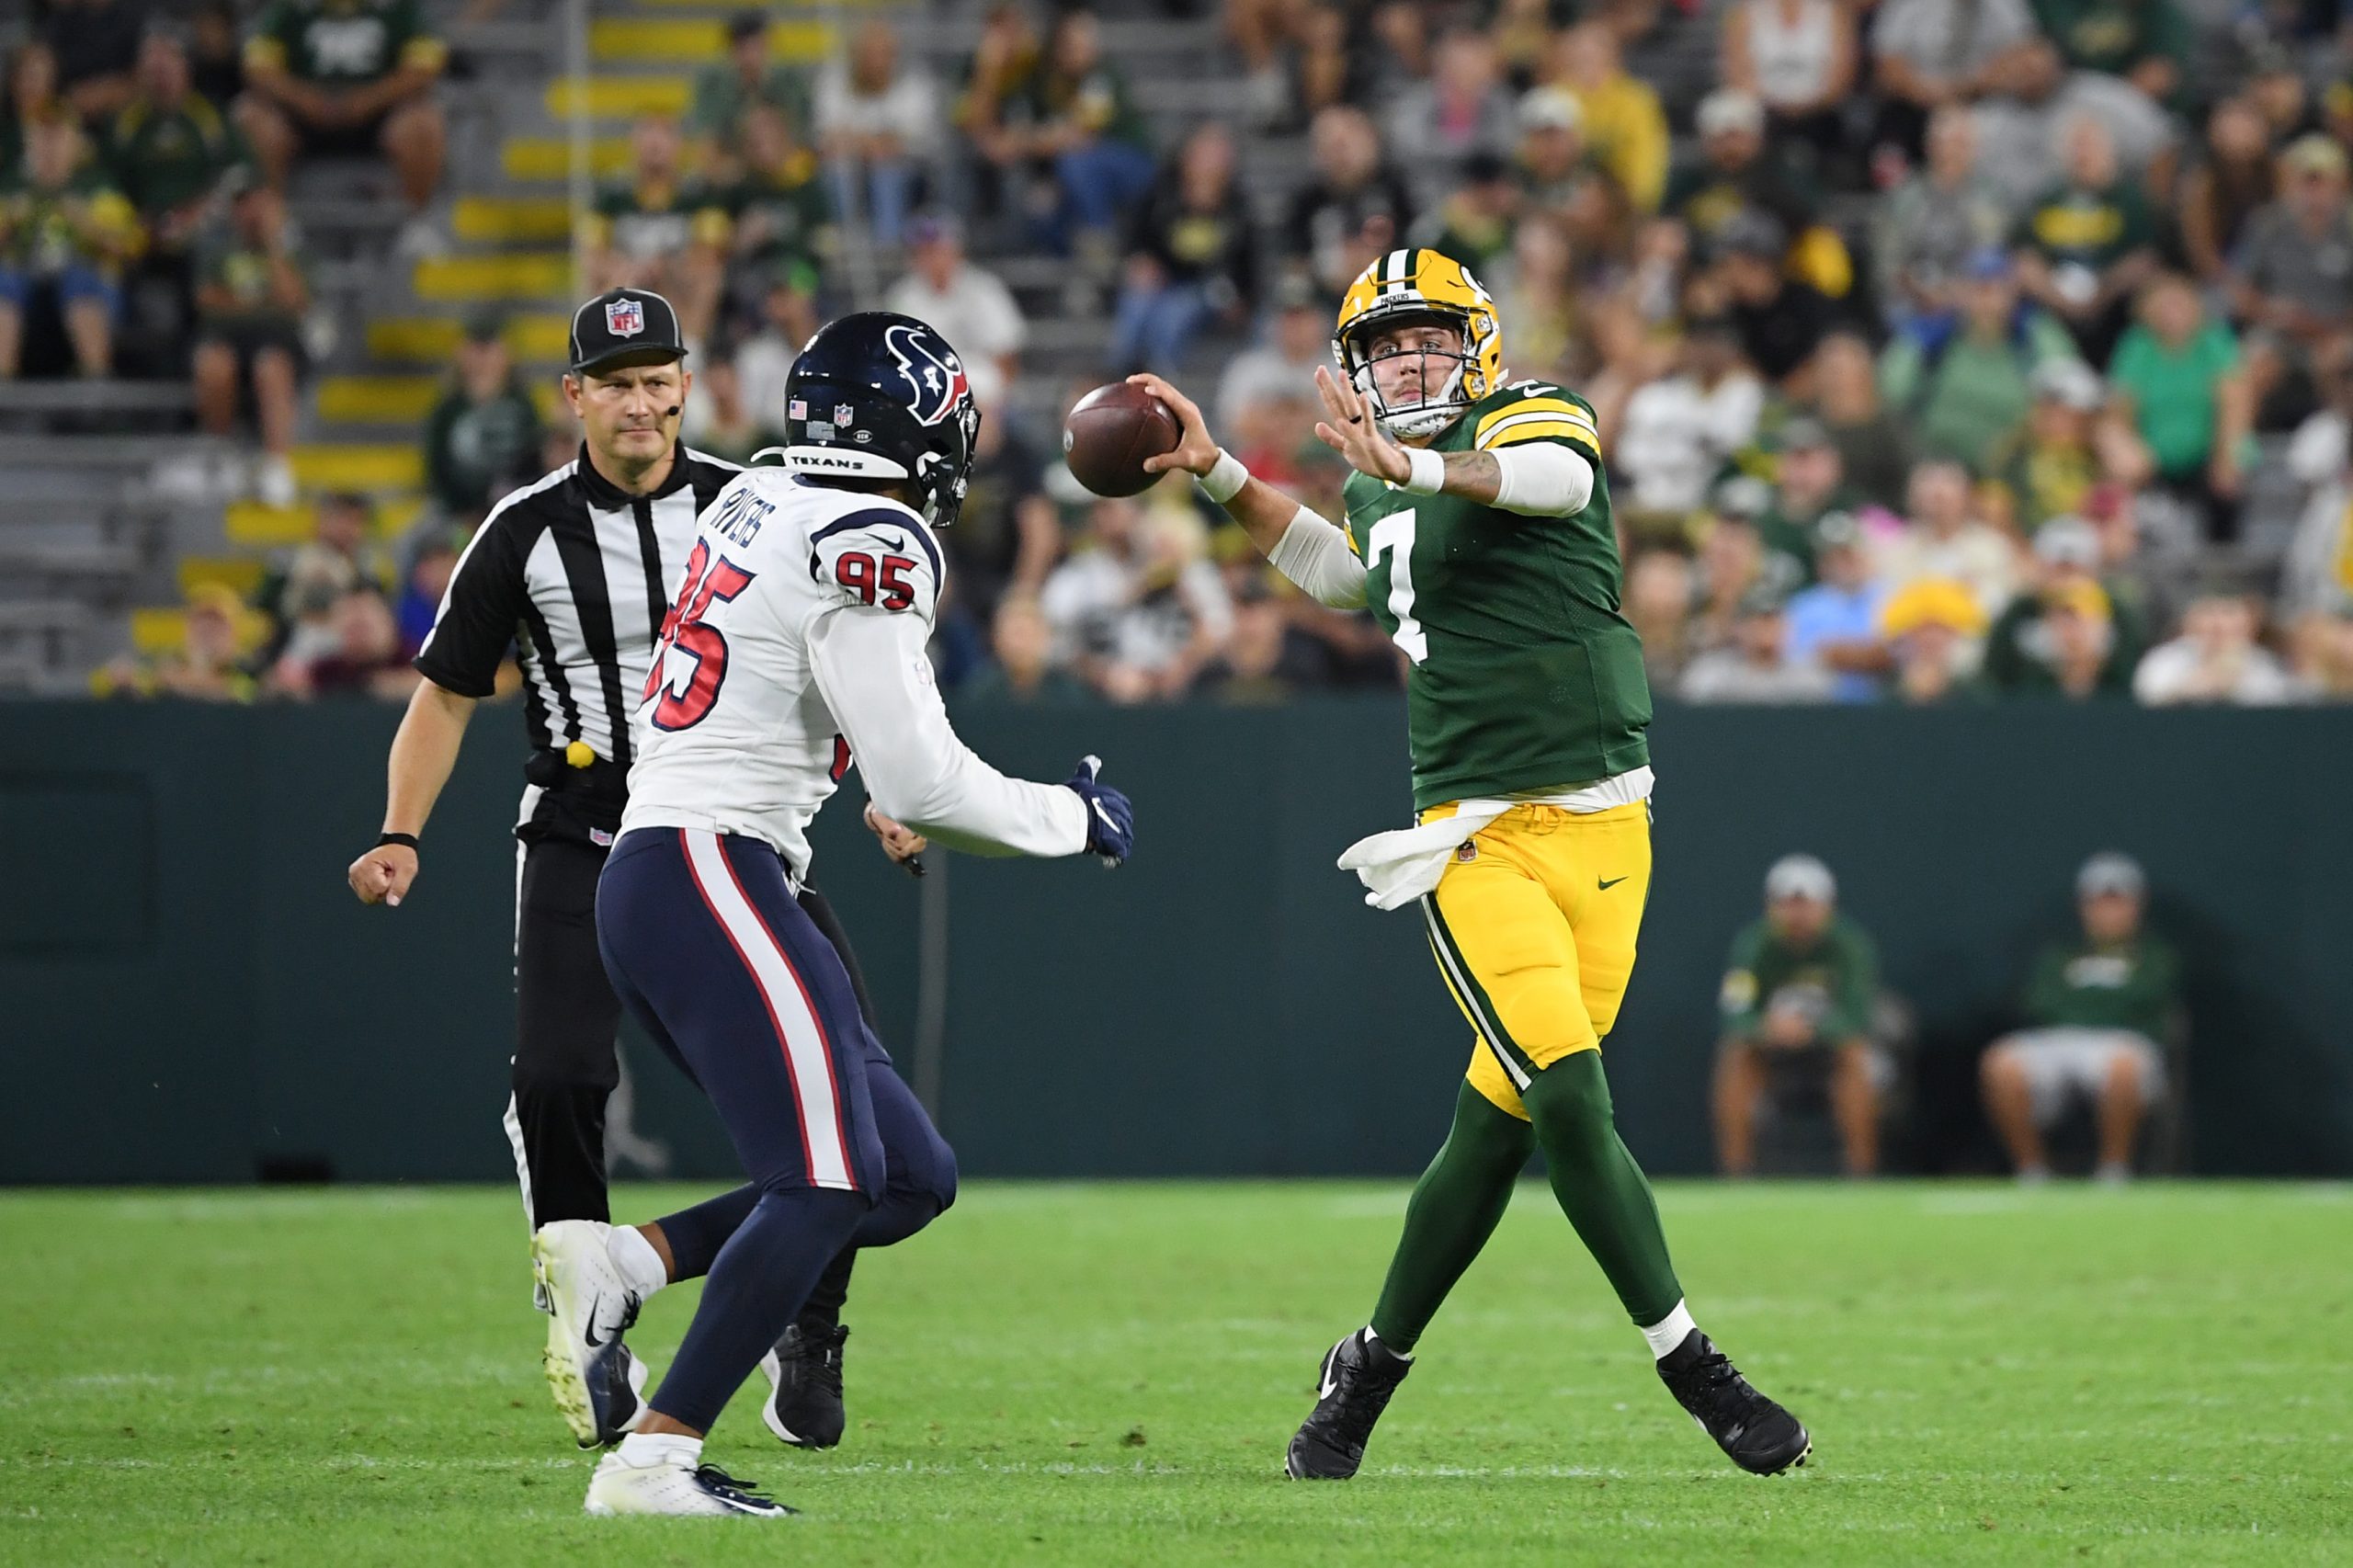 Kurt Benkert of the Green Bay Packers throws an interception in the second half of a preseason game.